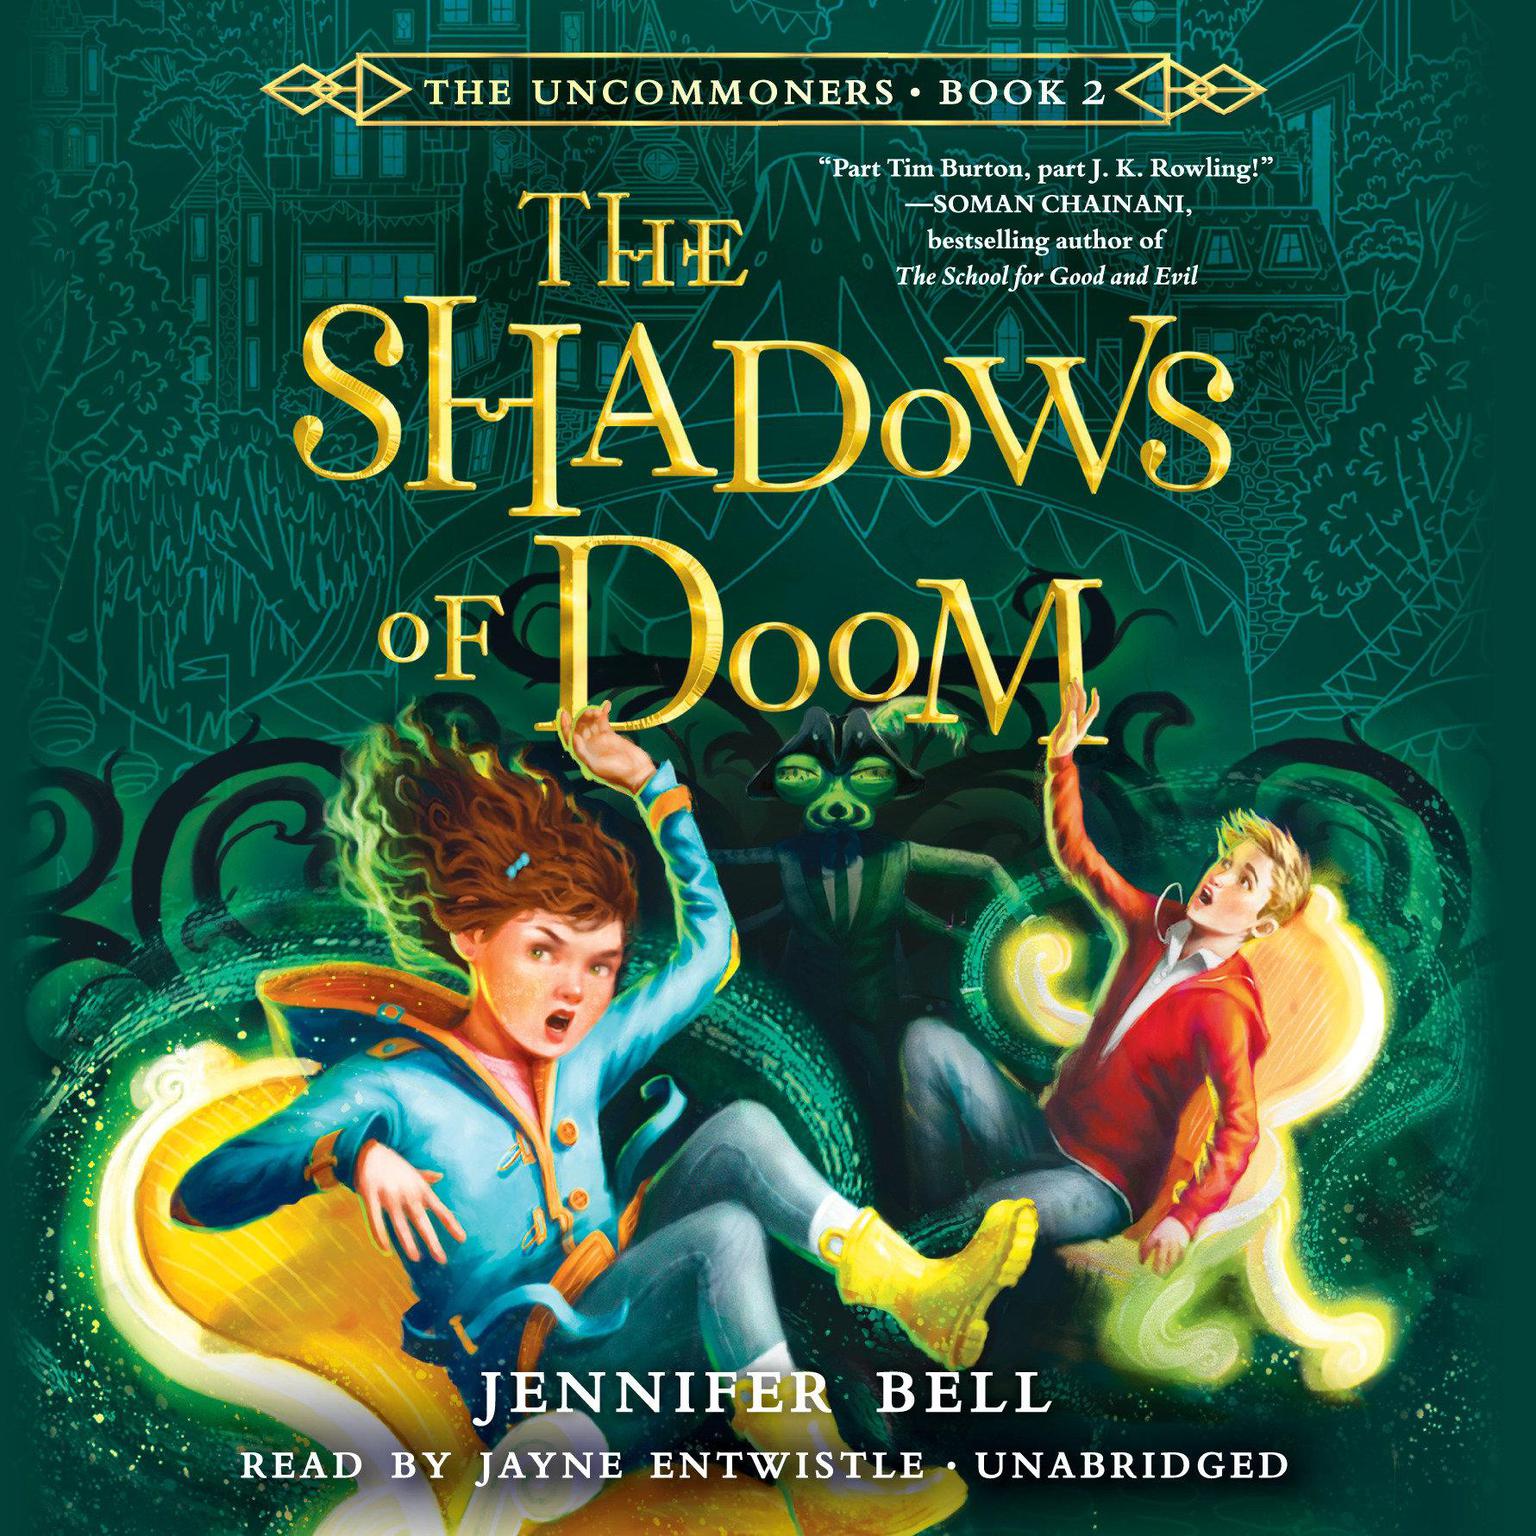 The Uncommoners #2: The Shadows of Doom Audiobook, by Jennifer Bell